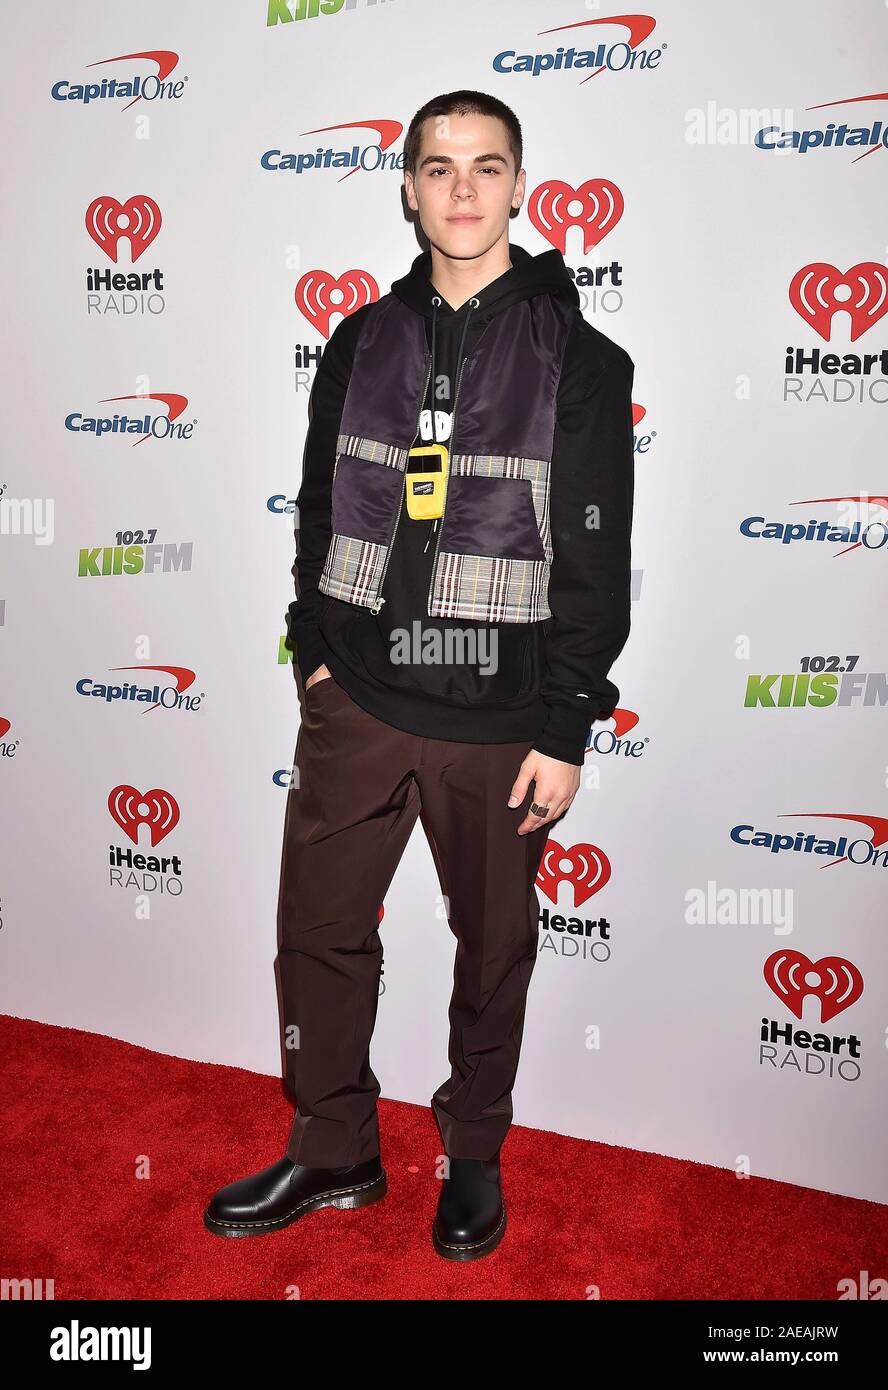 INGLEWOOD, CA - DECEMBER 06: AJ Mitchell attends 102.7 KIIS FM's Jingle Ball 2019 Presented by Capital One at the Forum on December 6, 2019 in Los Angeles, California. Stock Photo